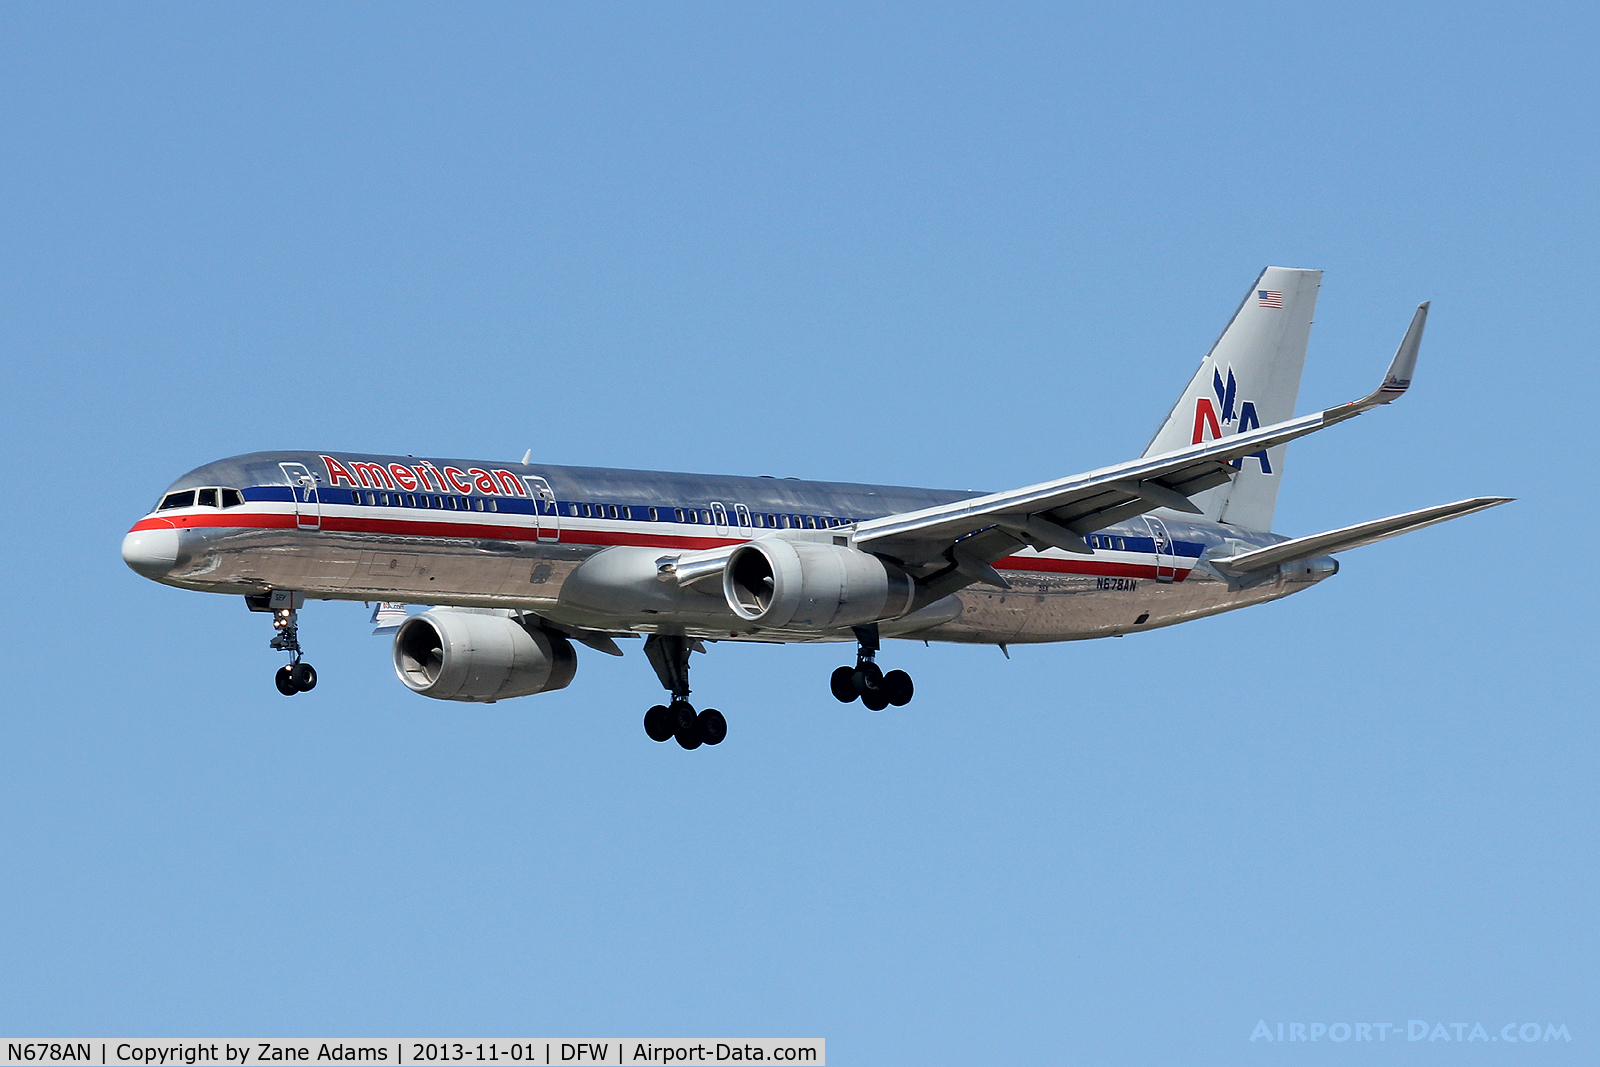 N678AN, 1998 Boeing 757-223 C/N 29428, American Airlines at DFW Airport